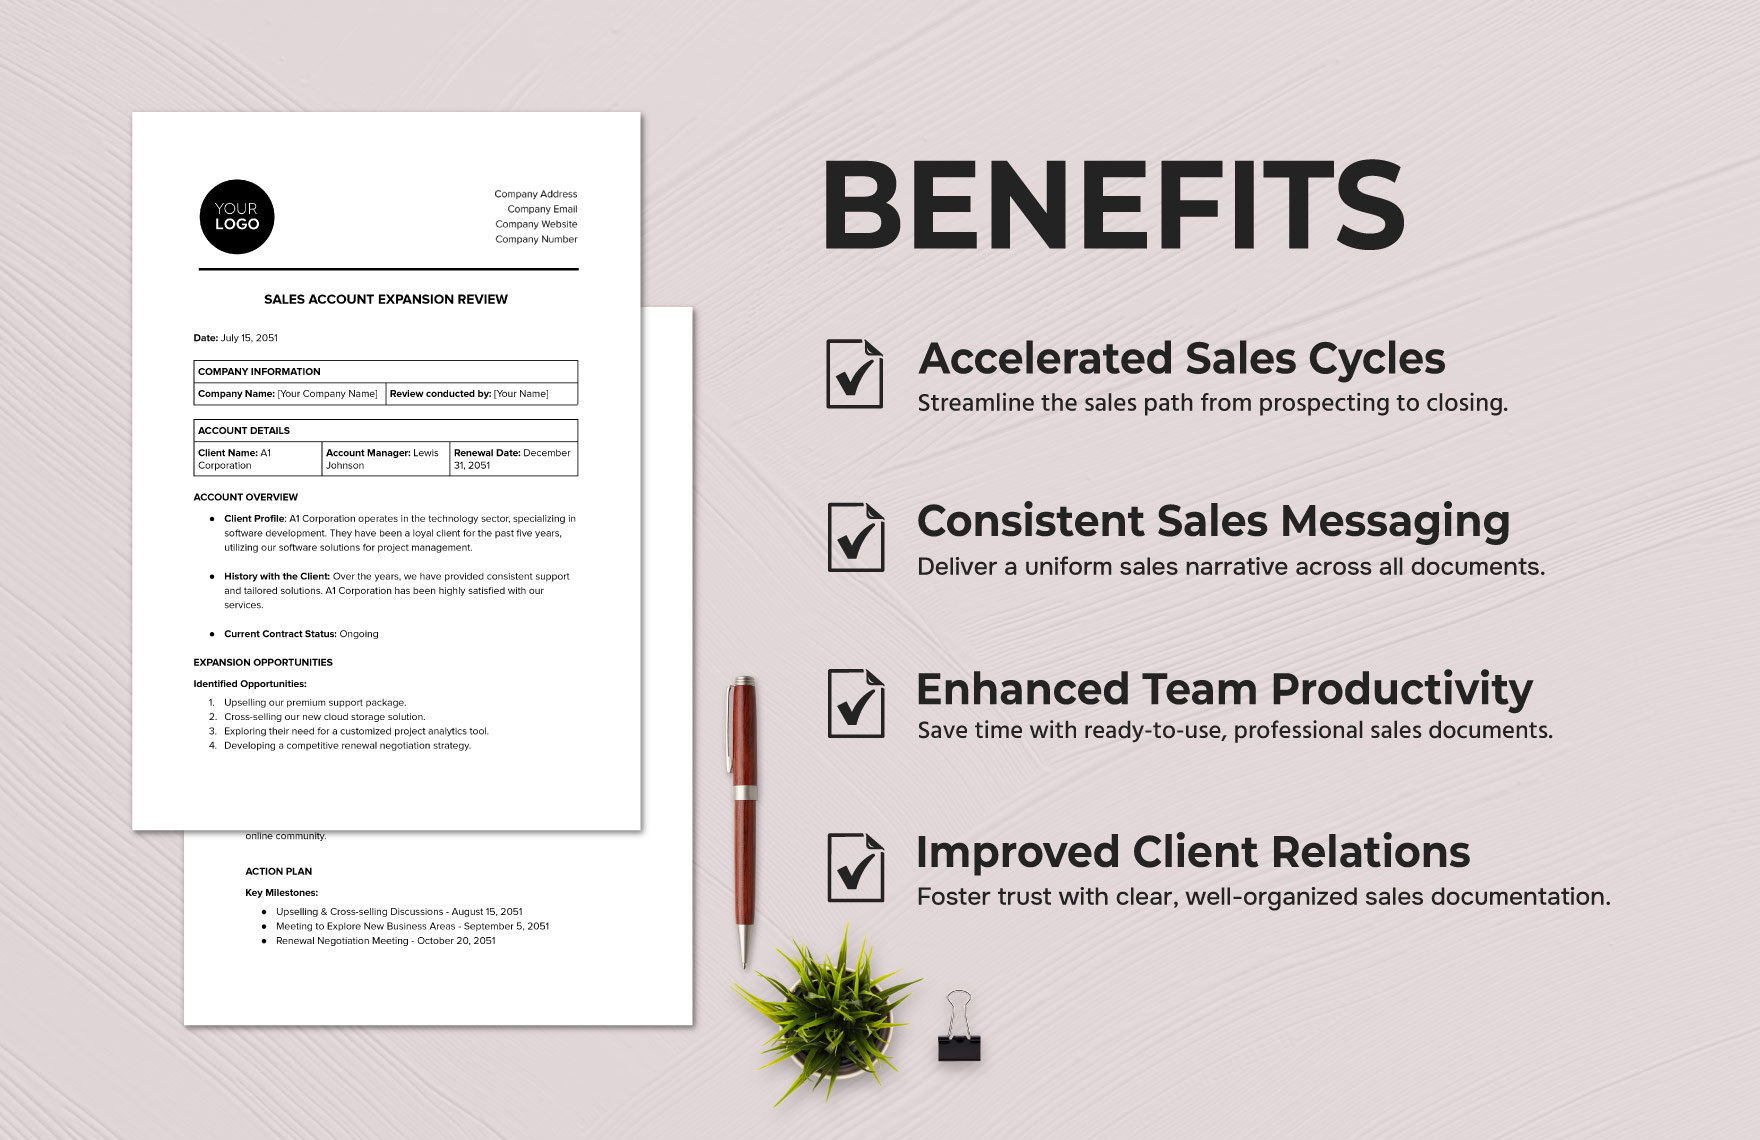 Sales Account Expansion Review Template in Word PDF Google Docs